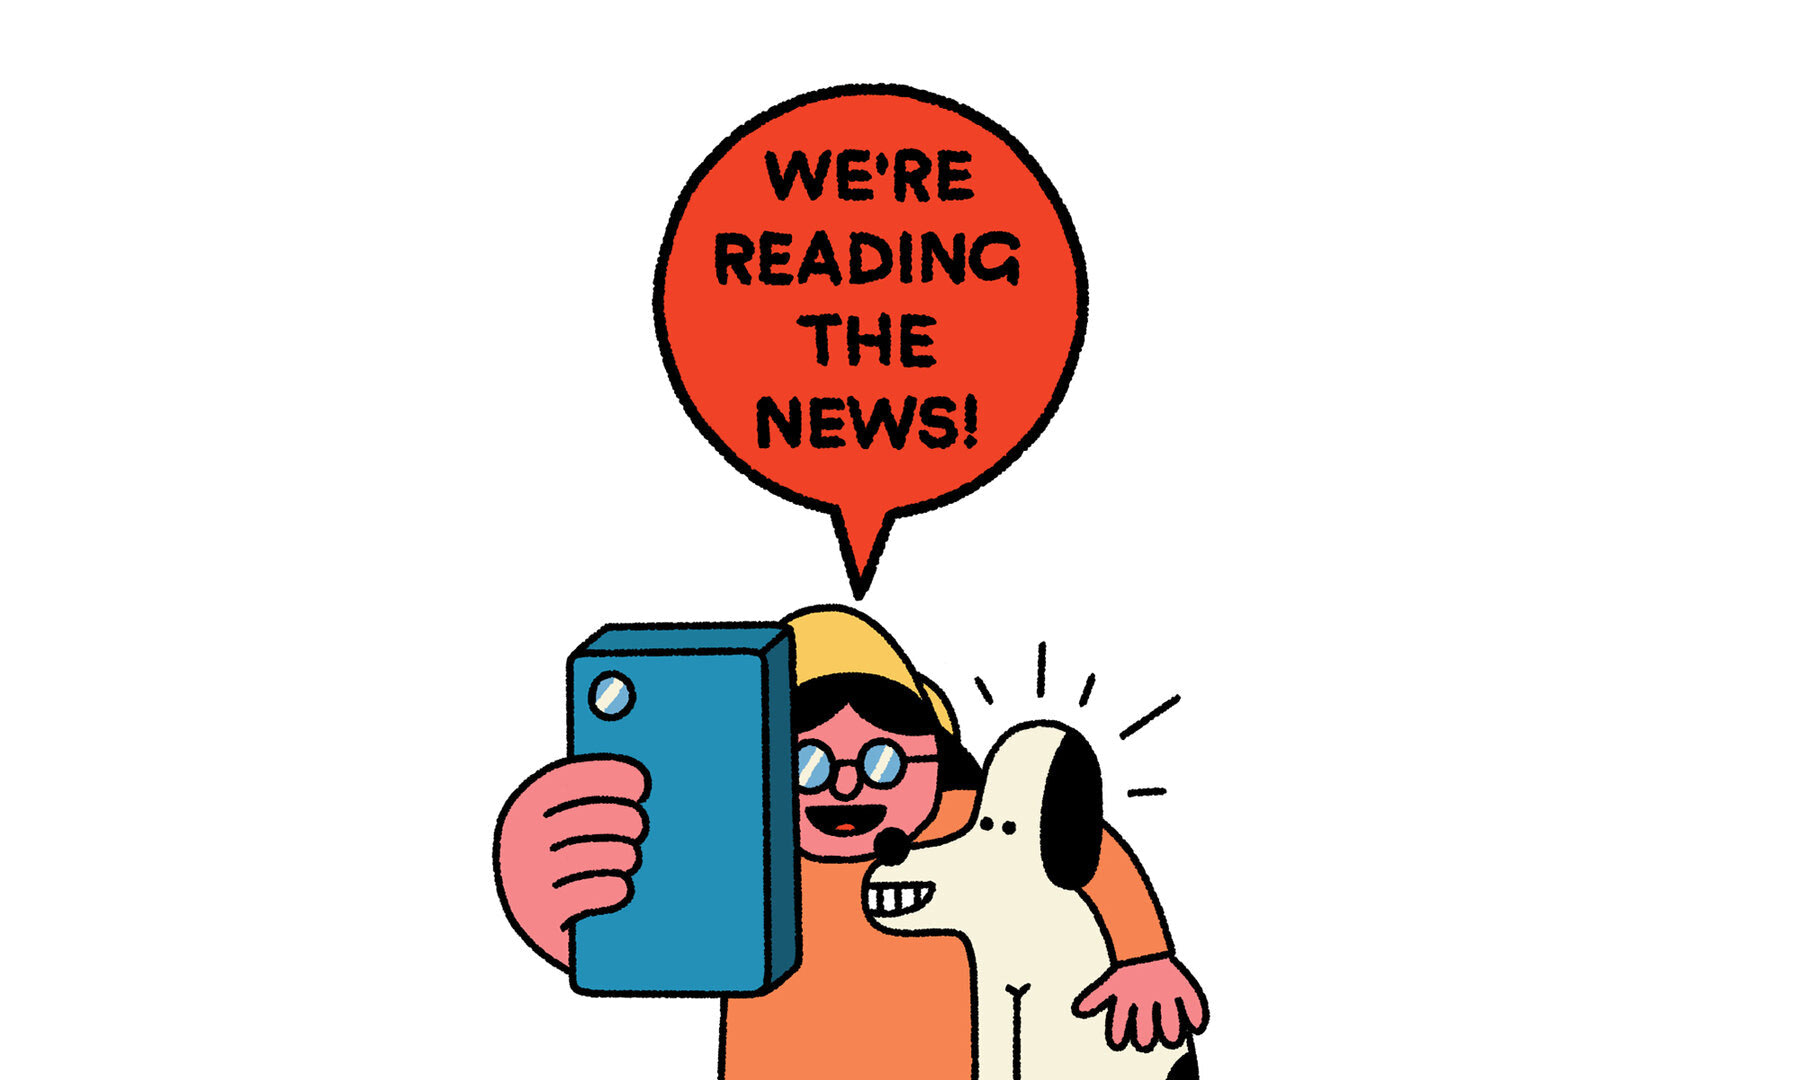 newswise-we-re-reading-the-news.jpg